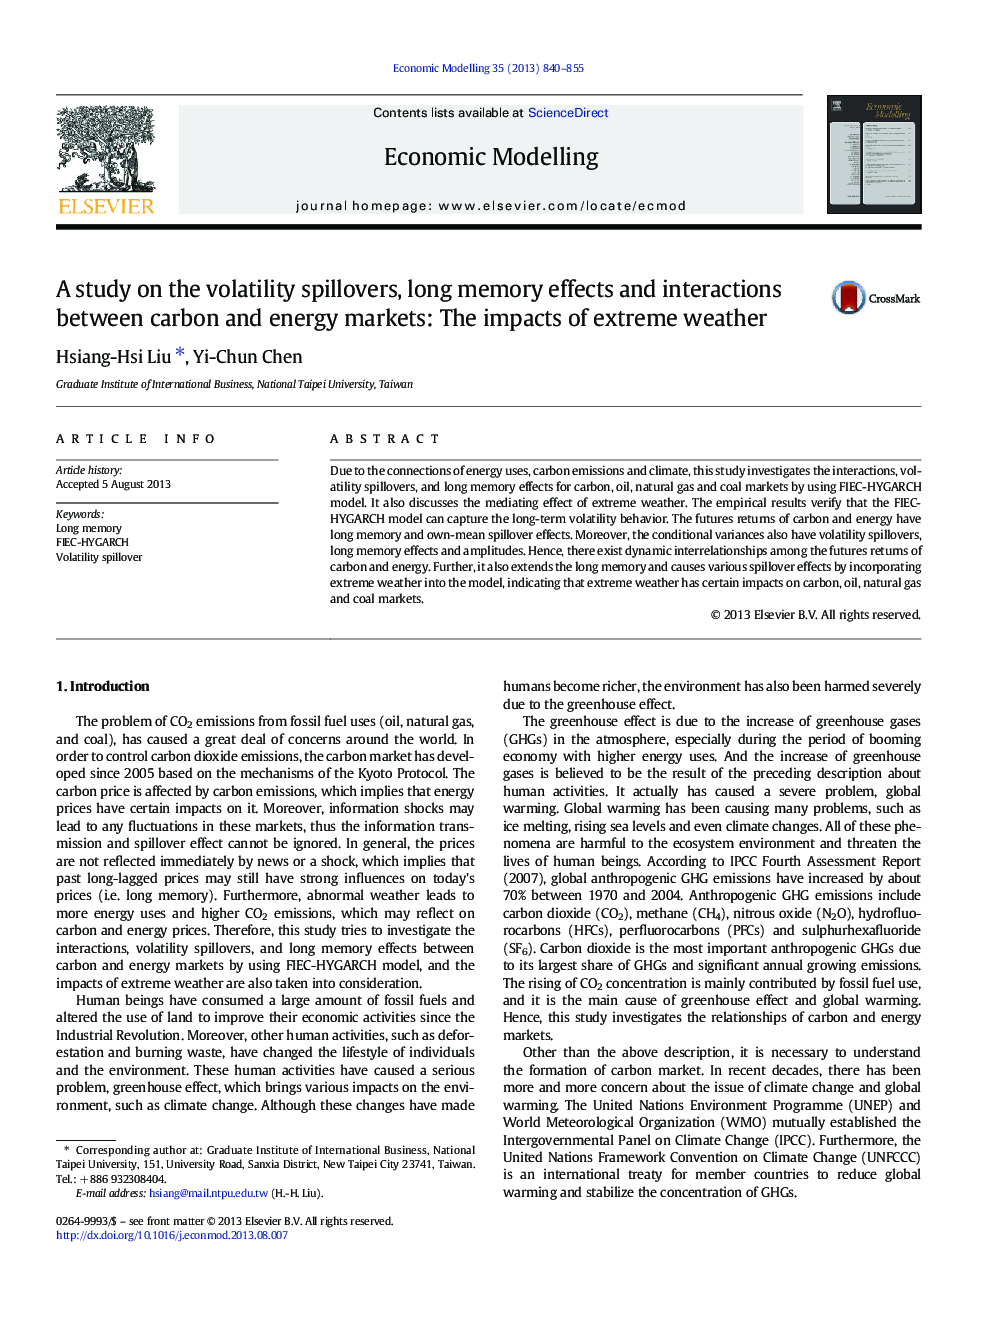 A study on the volatility spillovers, long memory effects and interactions between carbon and energy markets: The impacts of extreme weather